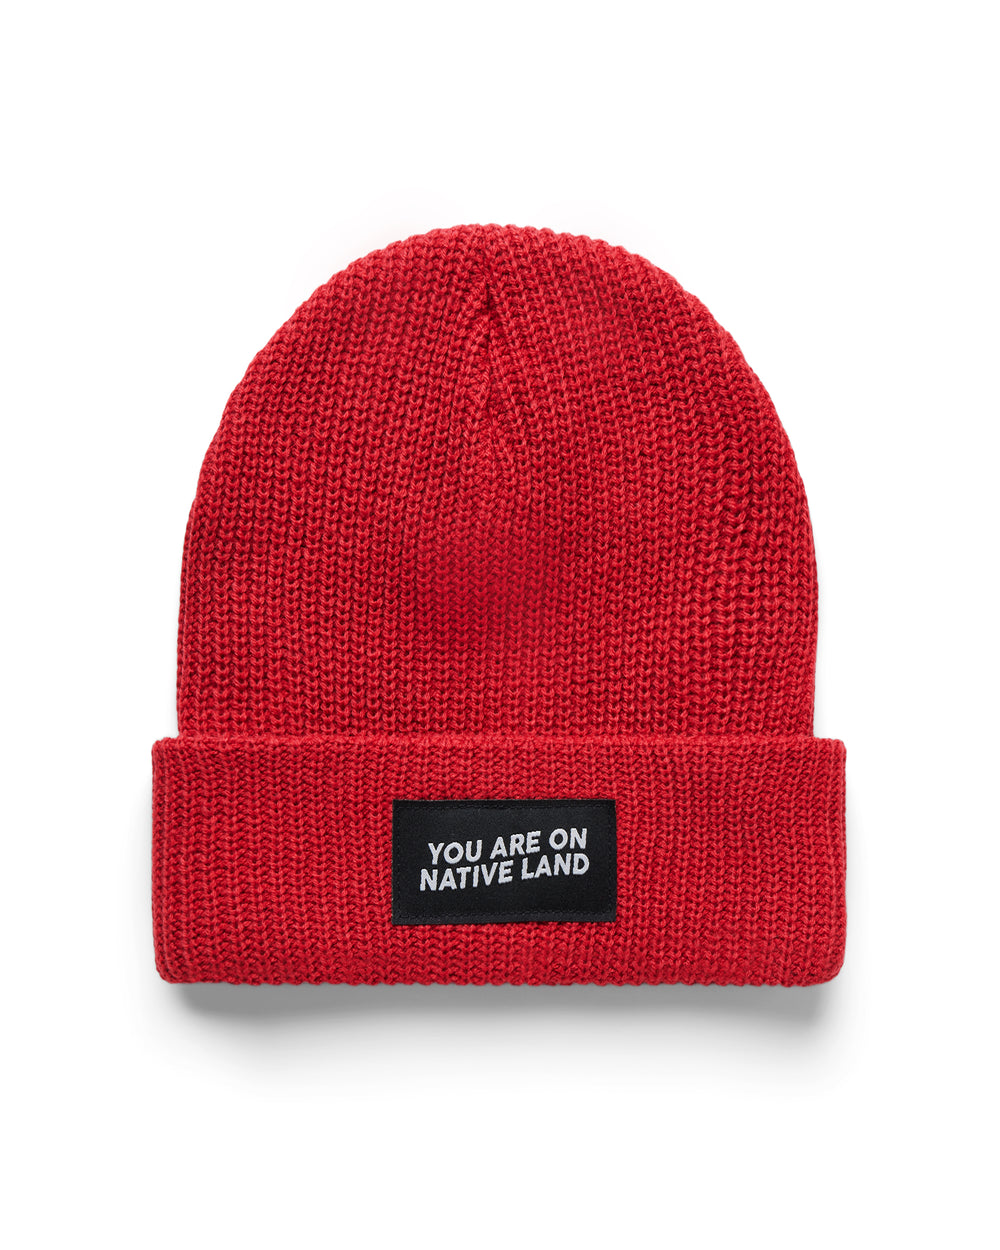 'YOU ARE ON NATIVE LAND' RIBBED BEANIE - ARTISANAL RED